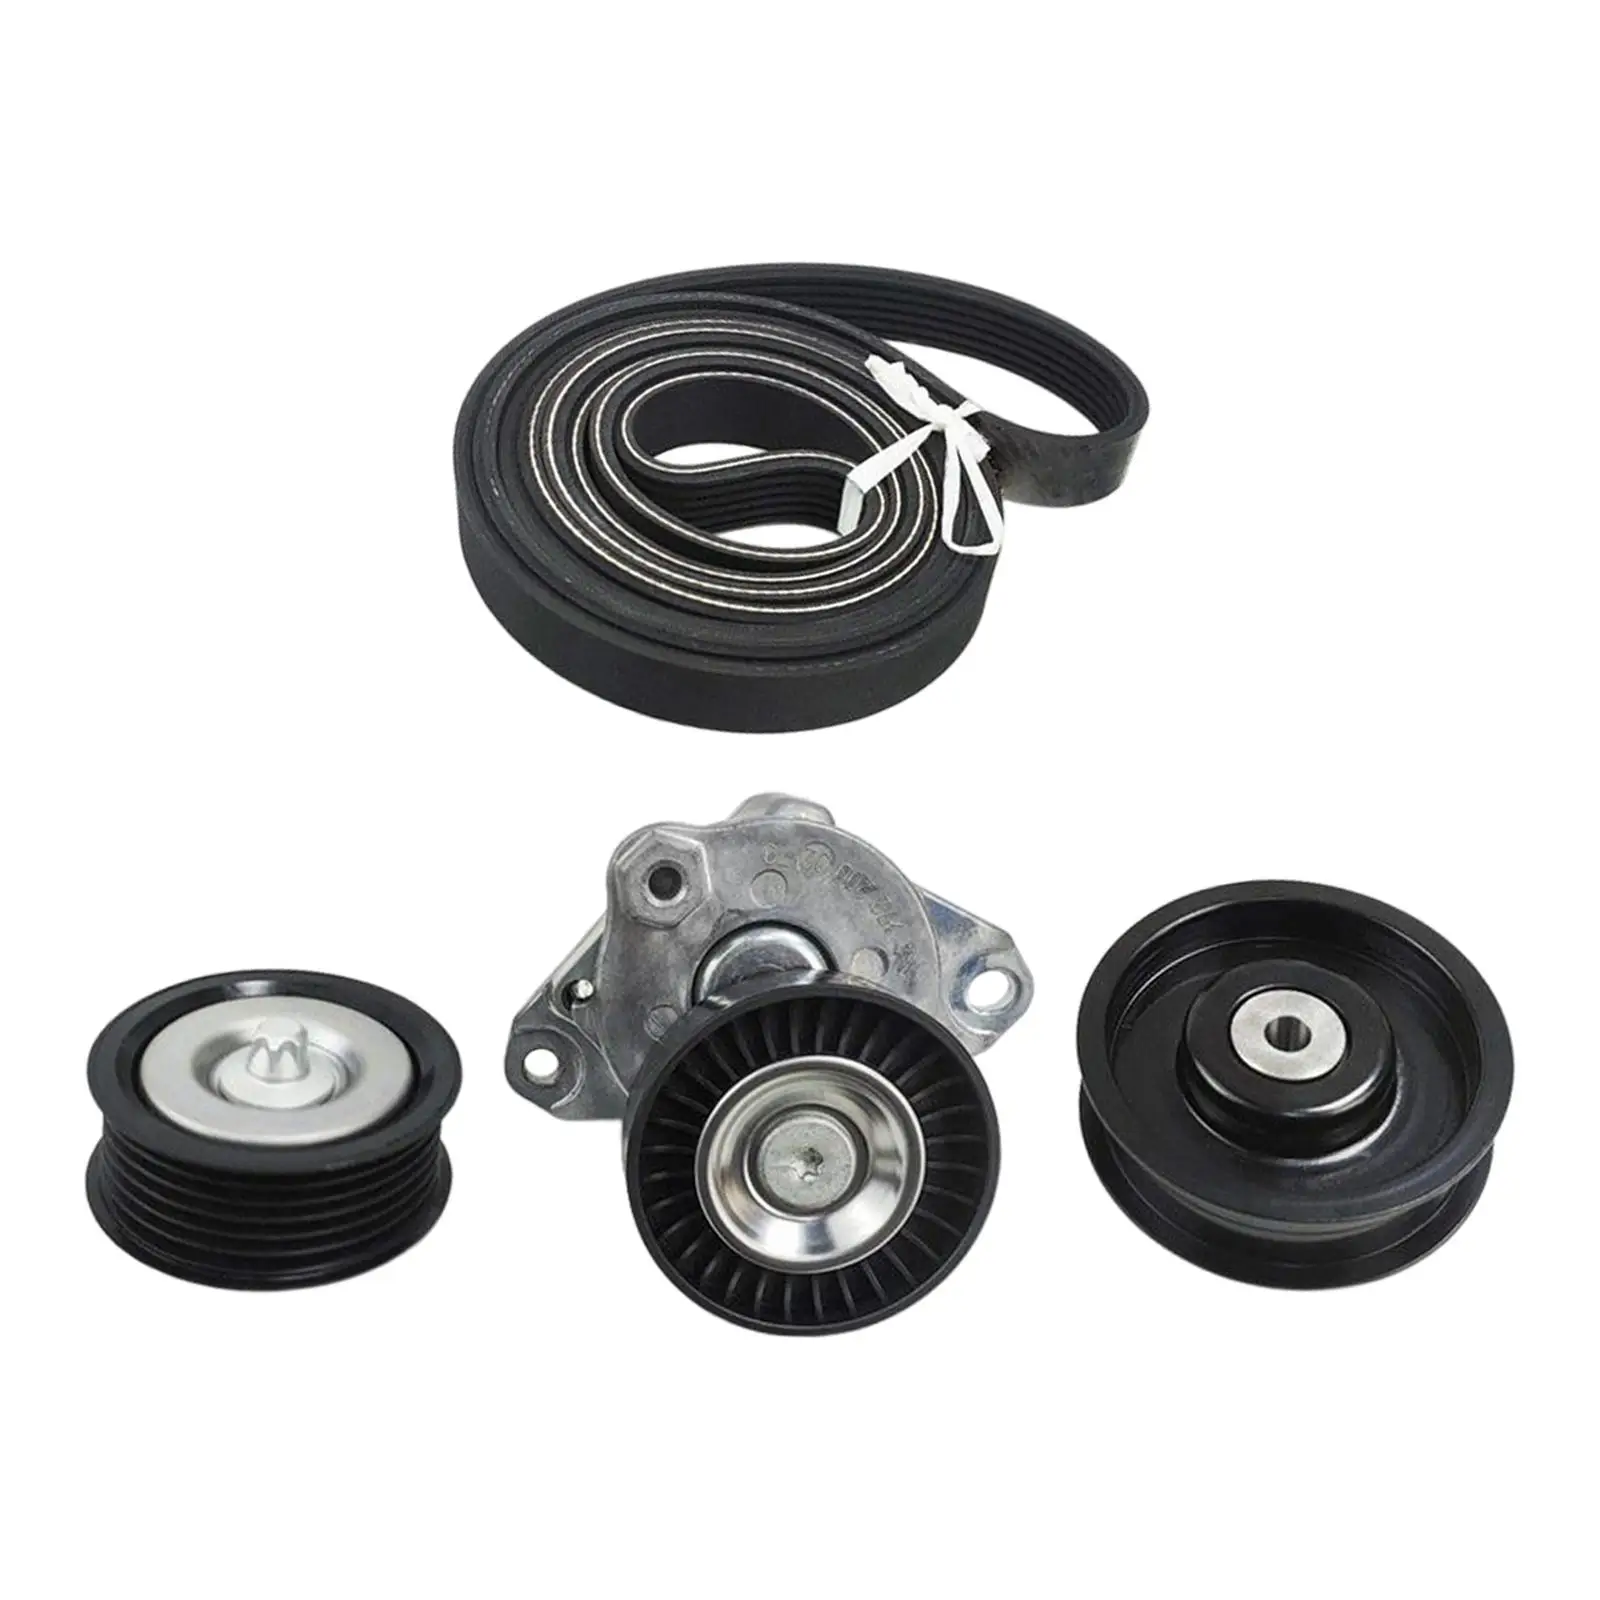 Car Belt Tensioner Pulley Assembly Replacement A2722000270 Repair Parts for C230 C280 C300 CLK350 R350 ml350 Car Accessories